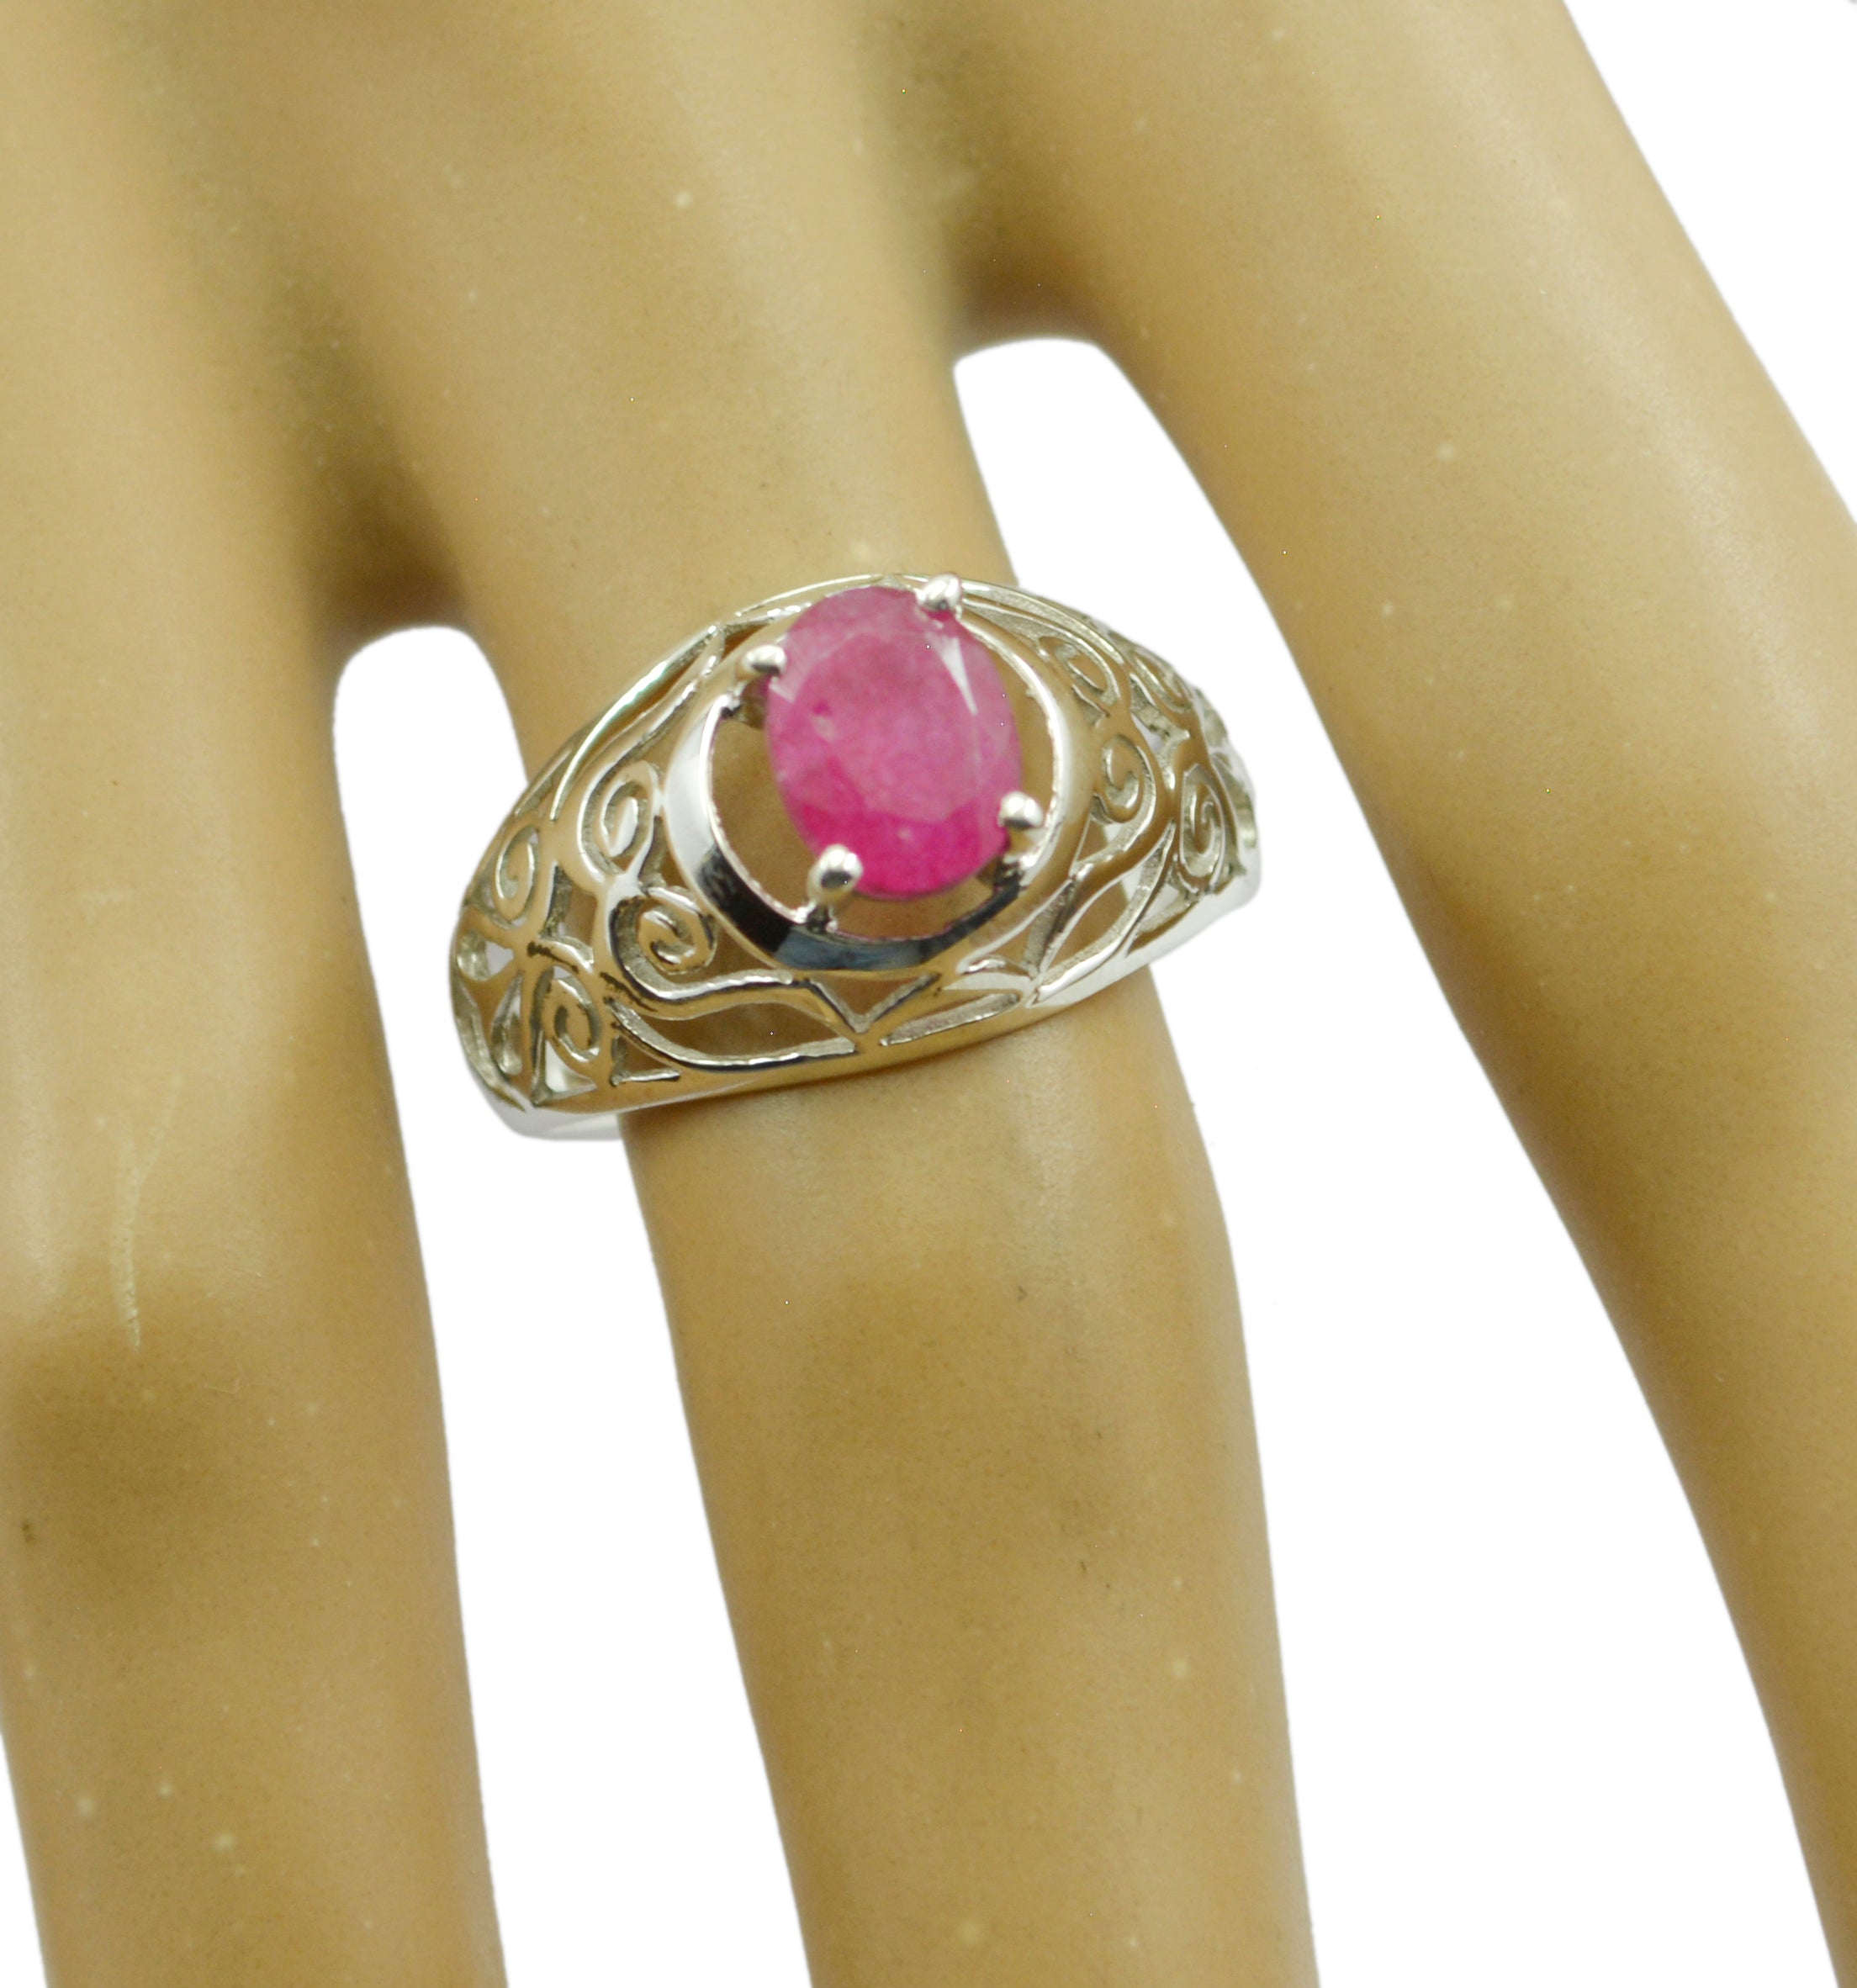 Enticing Gem Indianruby 925 Silver Ring Jewelry Pawn Shop Near Me